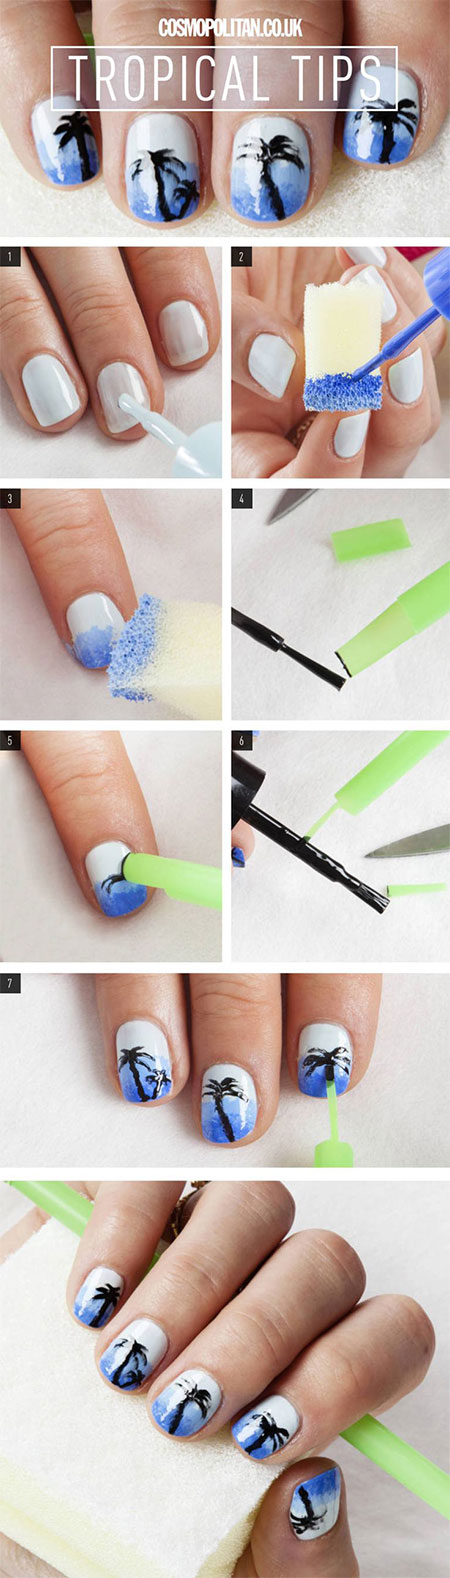 18-Easy-Step-By-Step-Summer-Nail-Art-Tutorials-For-Beginners-Learners-2015-18